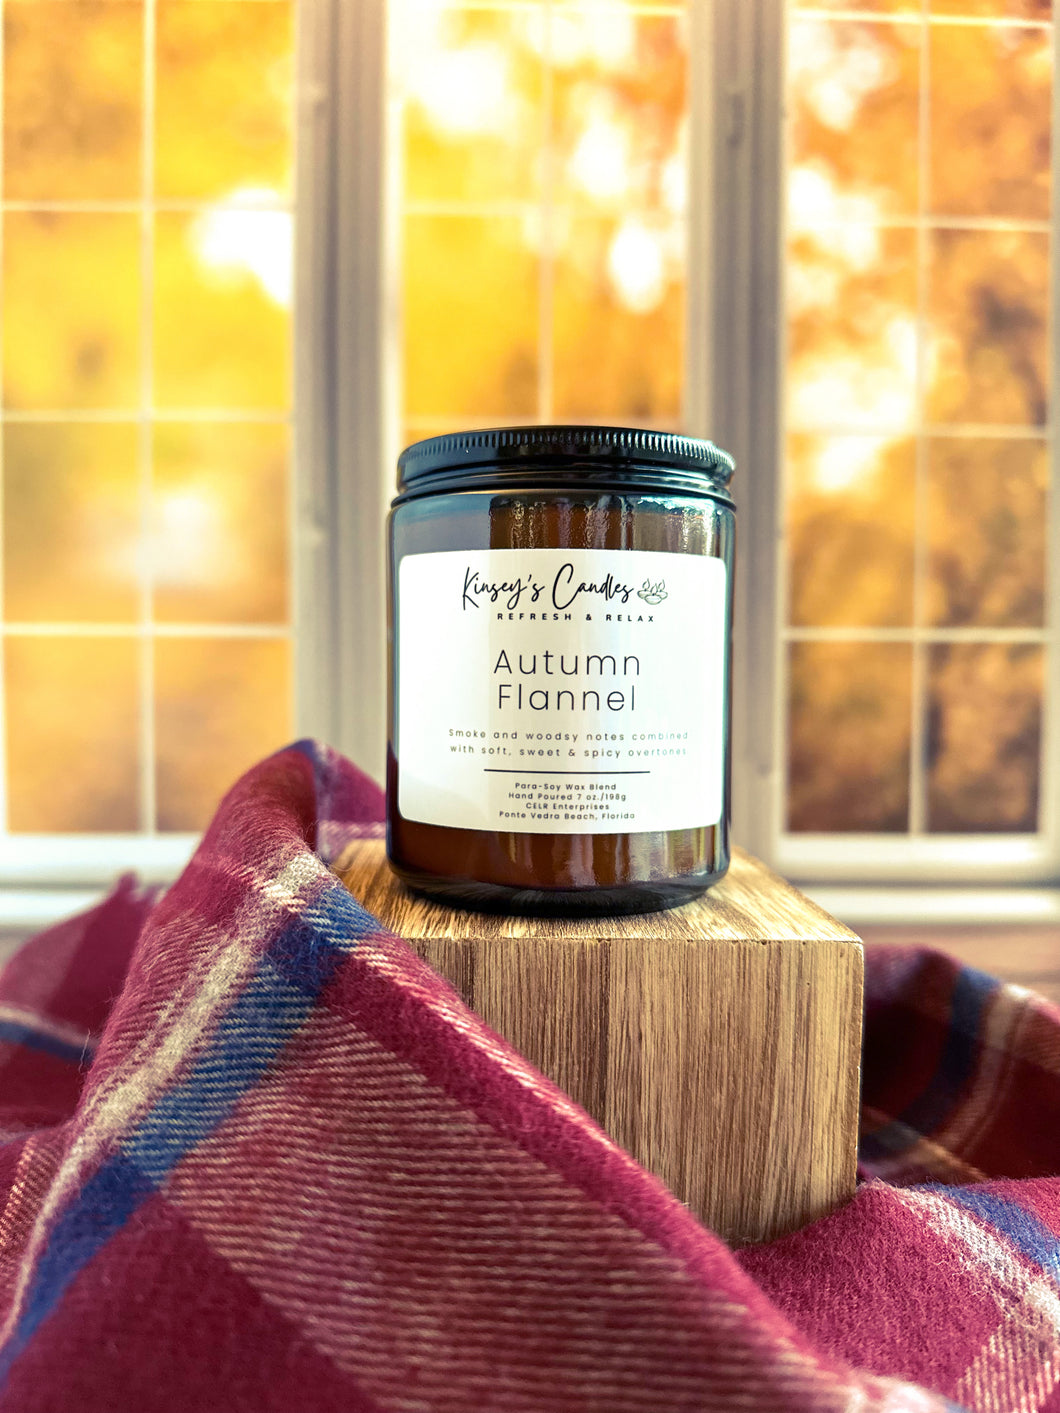 Autumn Flannel Candle - Kinsey's Candles